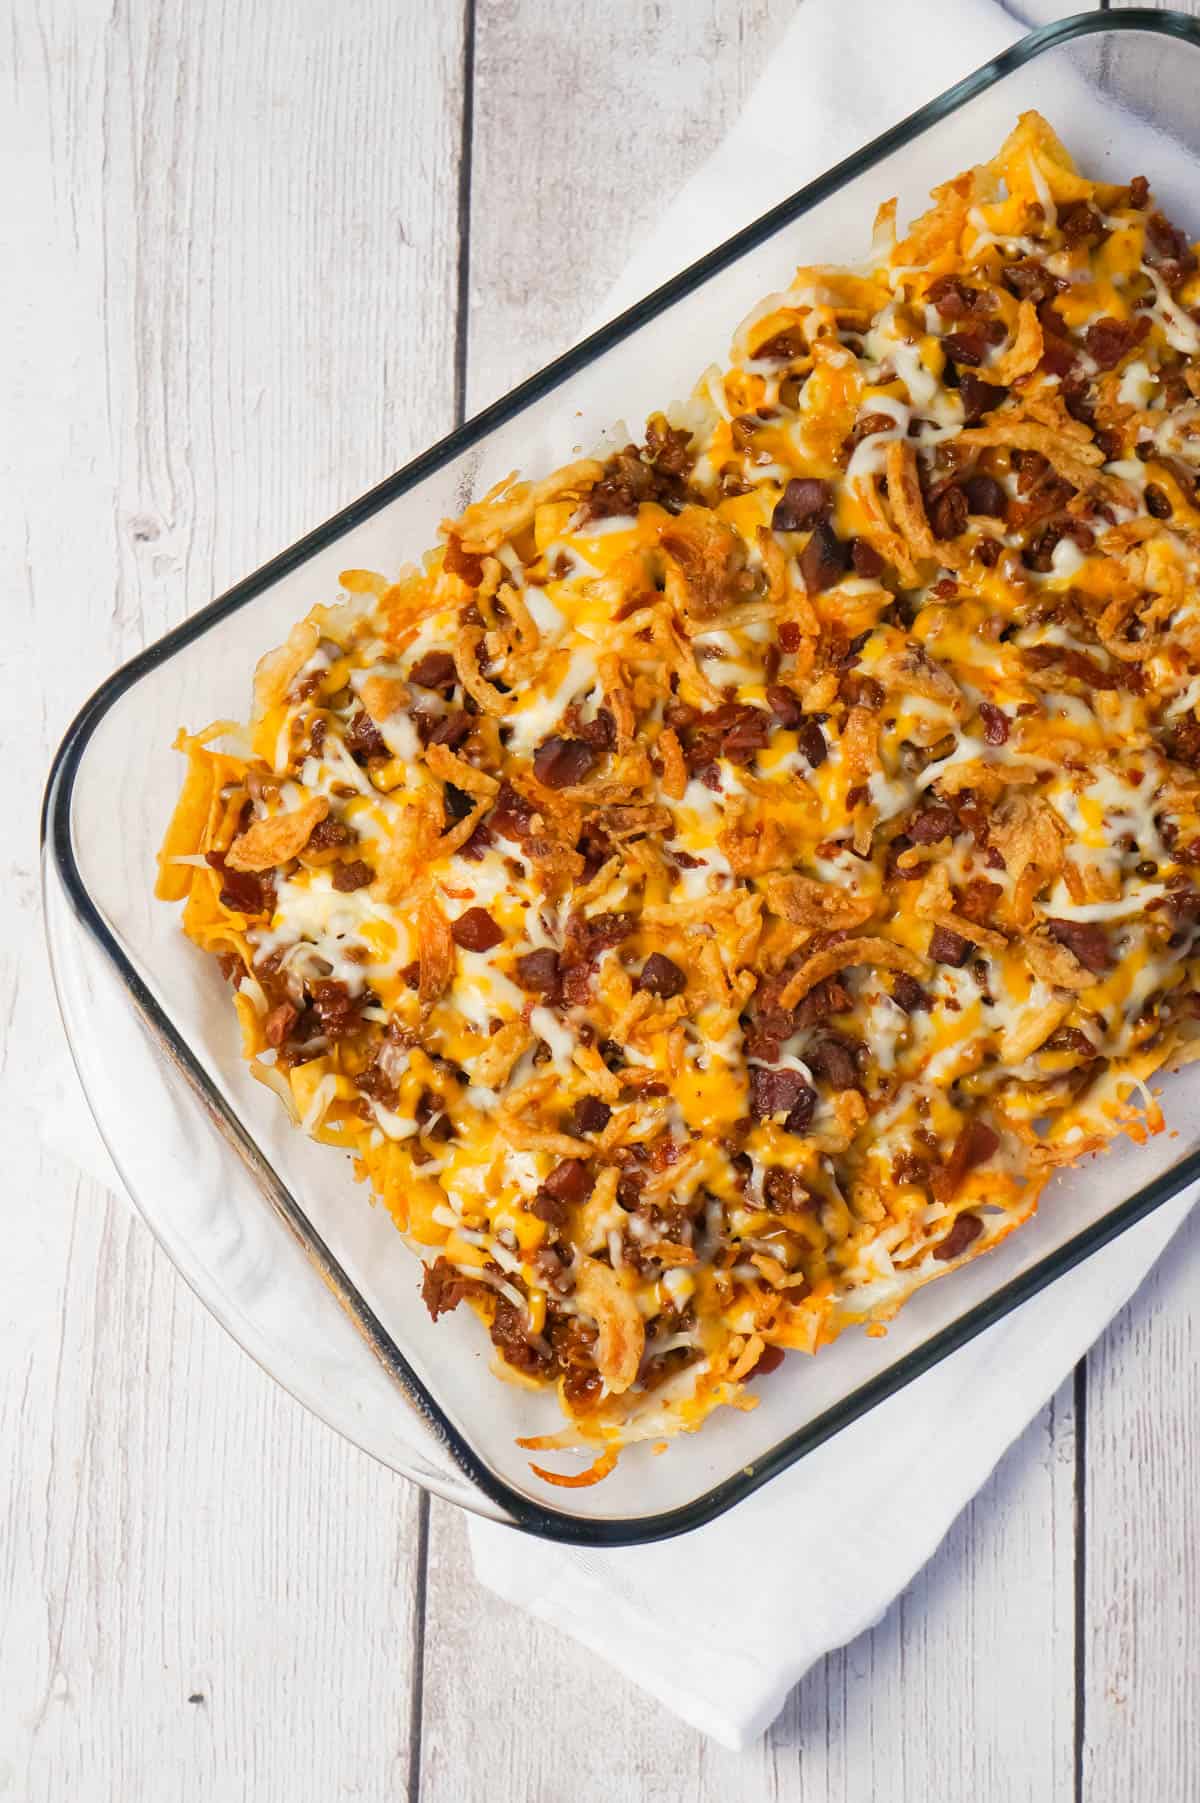 BBQ Bacon Cheeseburger Frito Pie is a delicous casserole with a base of Fritos corn chips, topped with ground beef and bacon crumble tossed in BBQ sauce, shredded cheese and French's fried onions.